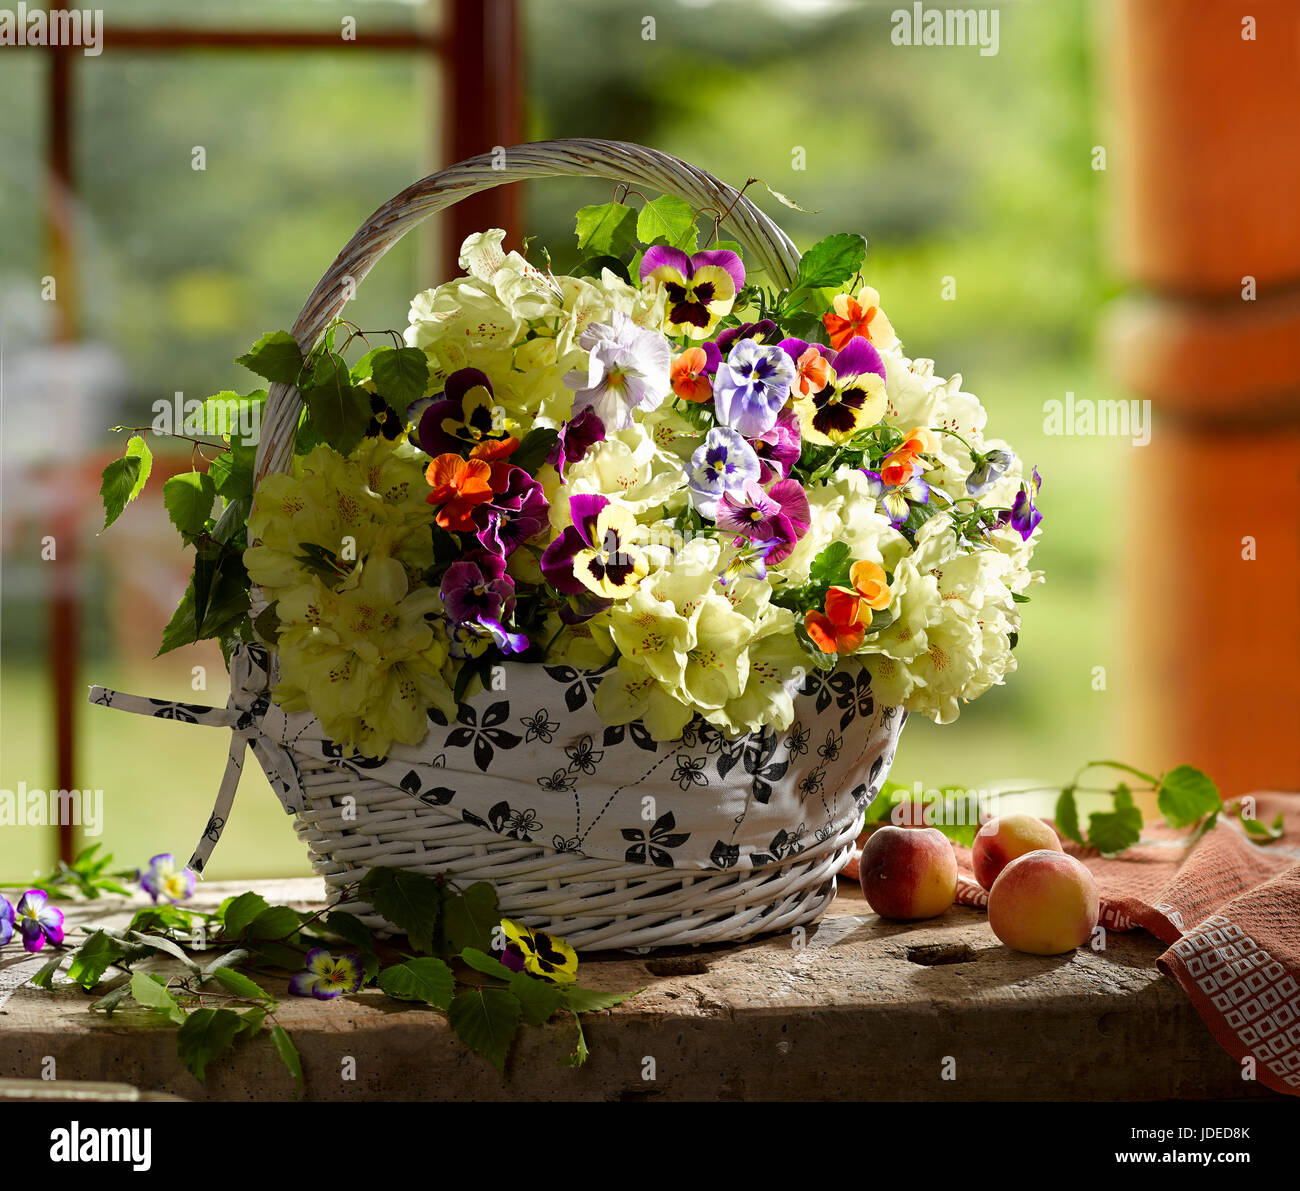 Bouquet of flowers with azaleas and pansies. Stock Photo